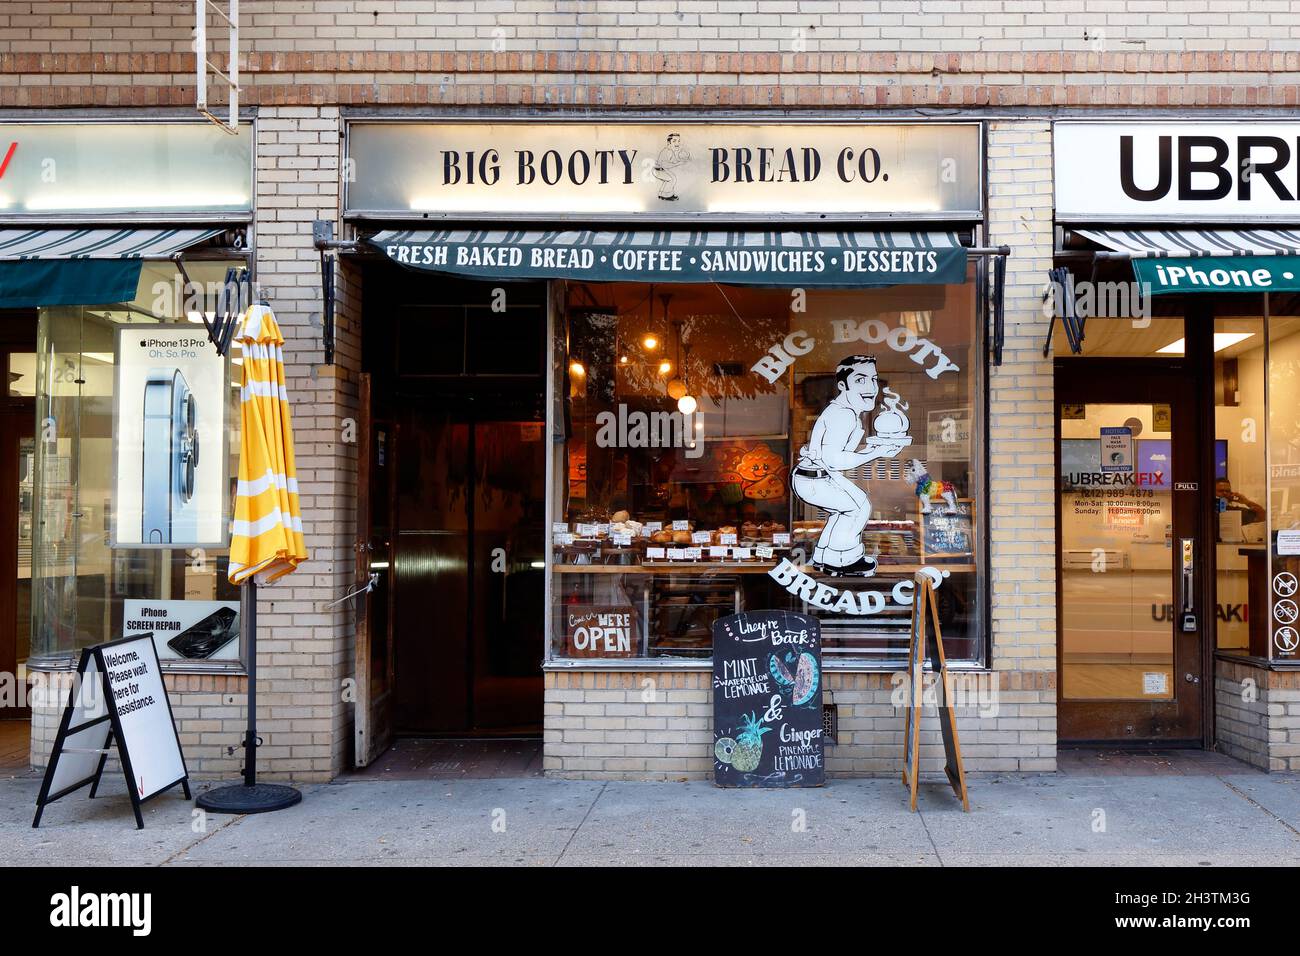 Big Booty Bread Co, 261 W 23rd St, New York, NYC storefront photo of a bakery in the Chelsea neighborhood of Manhattan. Stock Photo